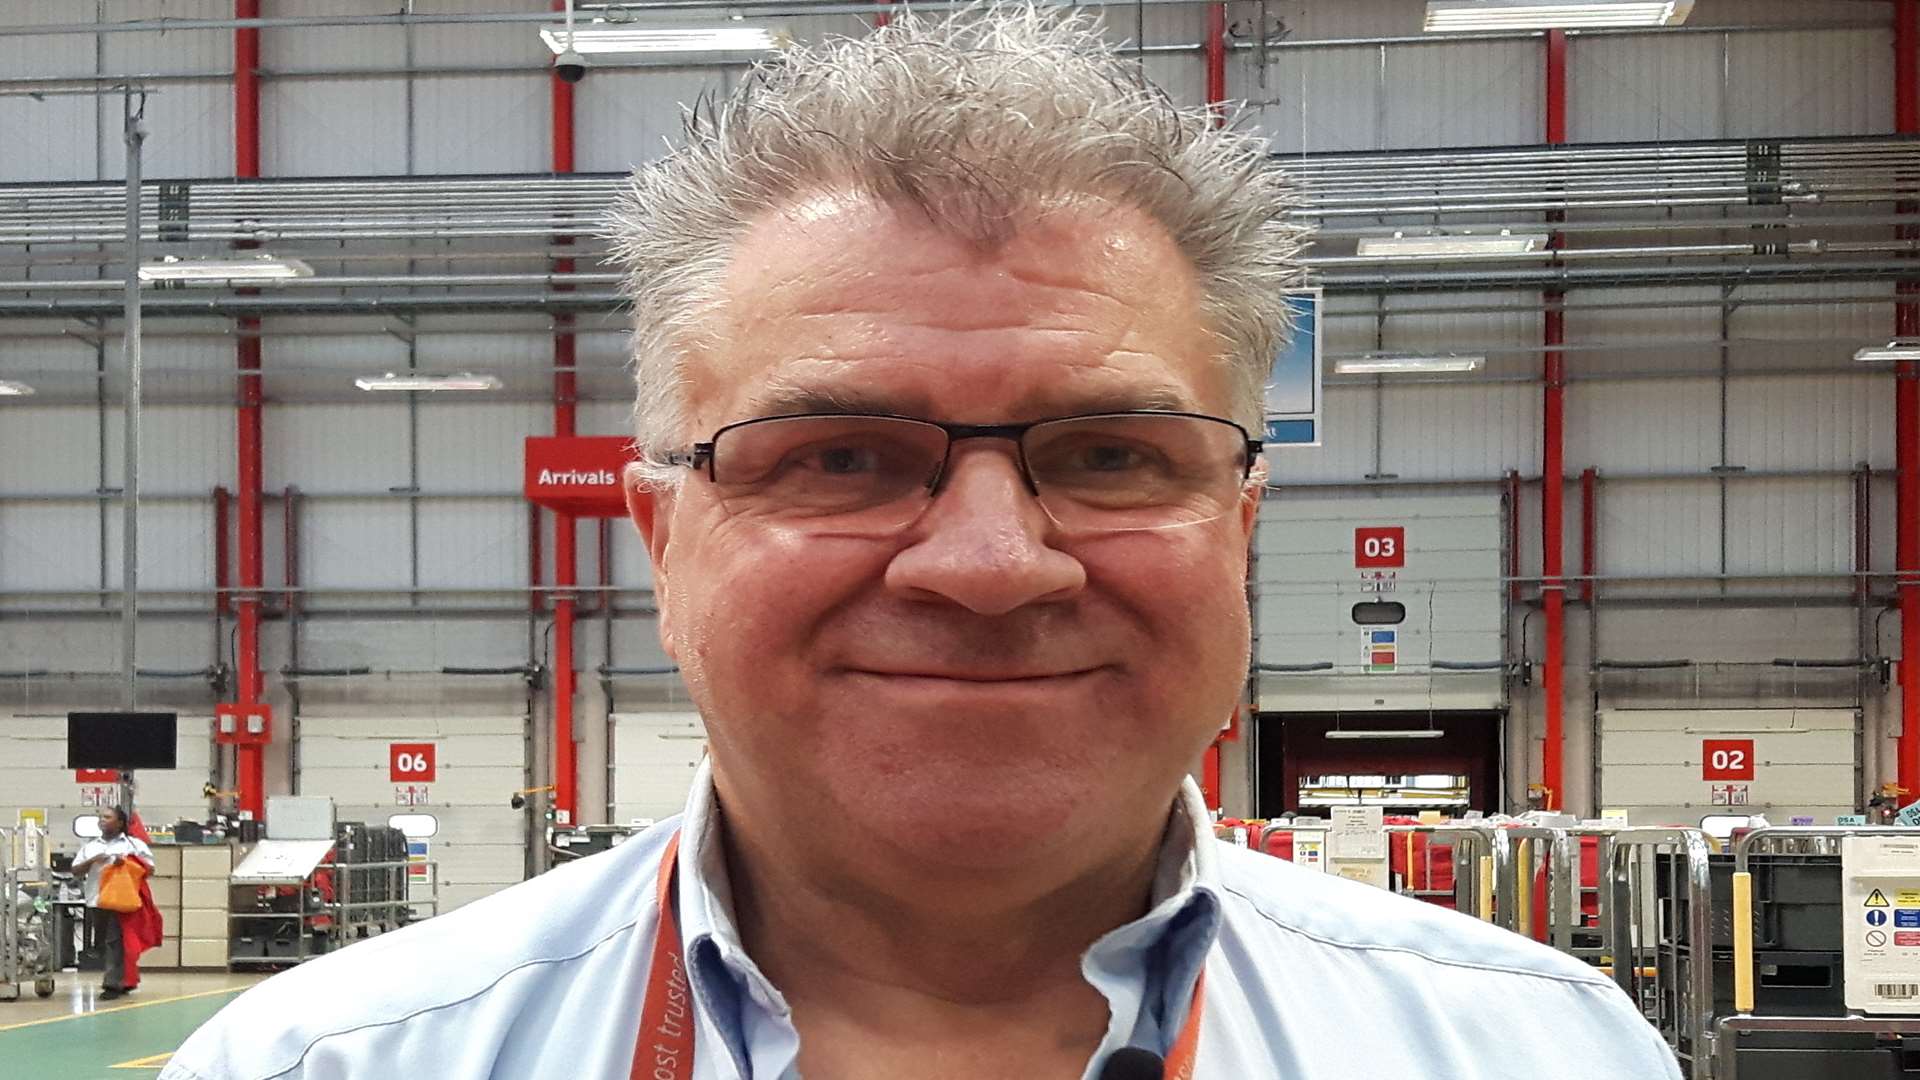 Bob French has worked for Royal Mail for 36 years